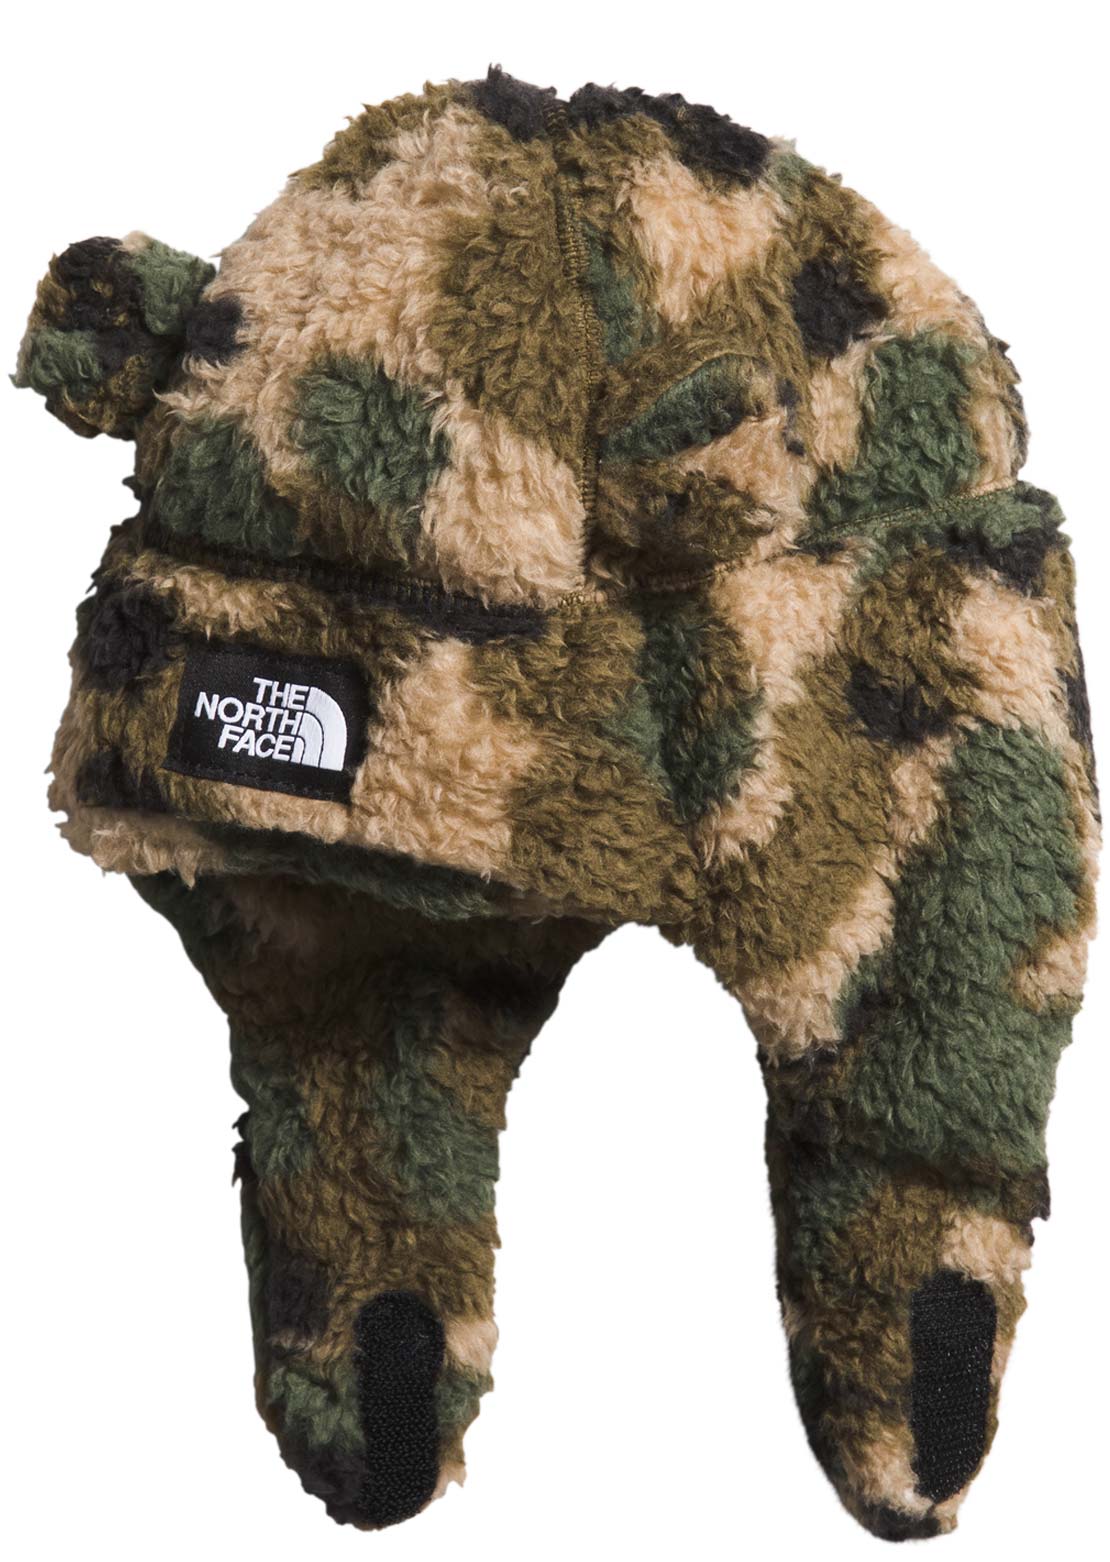 The North Face Infant Bear Suave Oso Beanie Military Olive Camo Texture Small Print